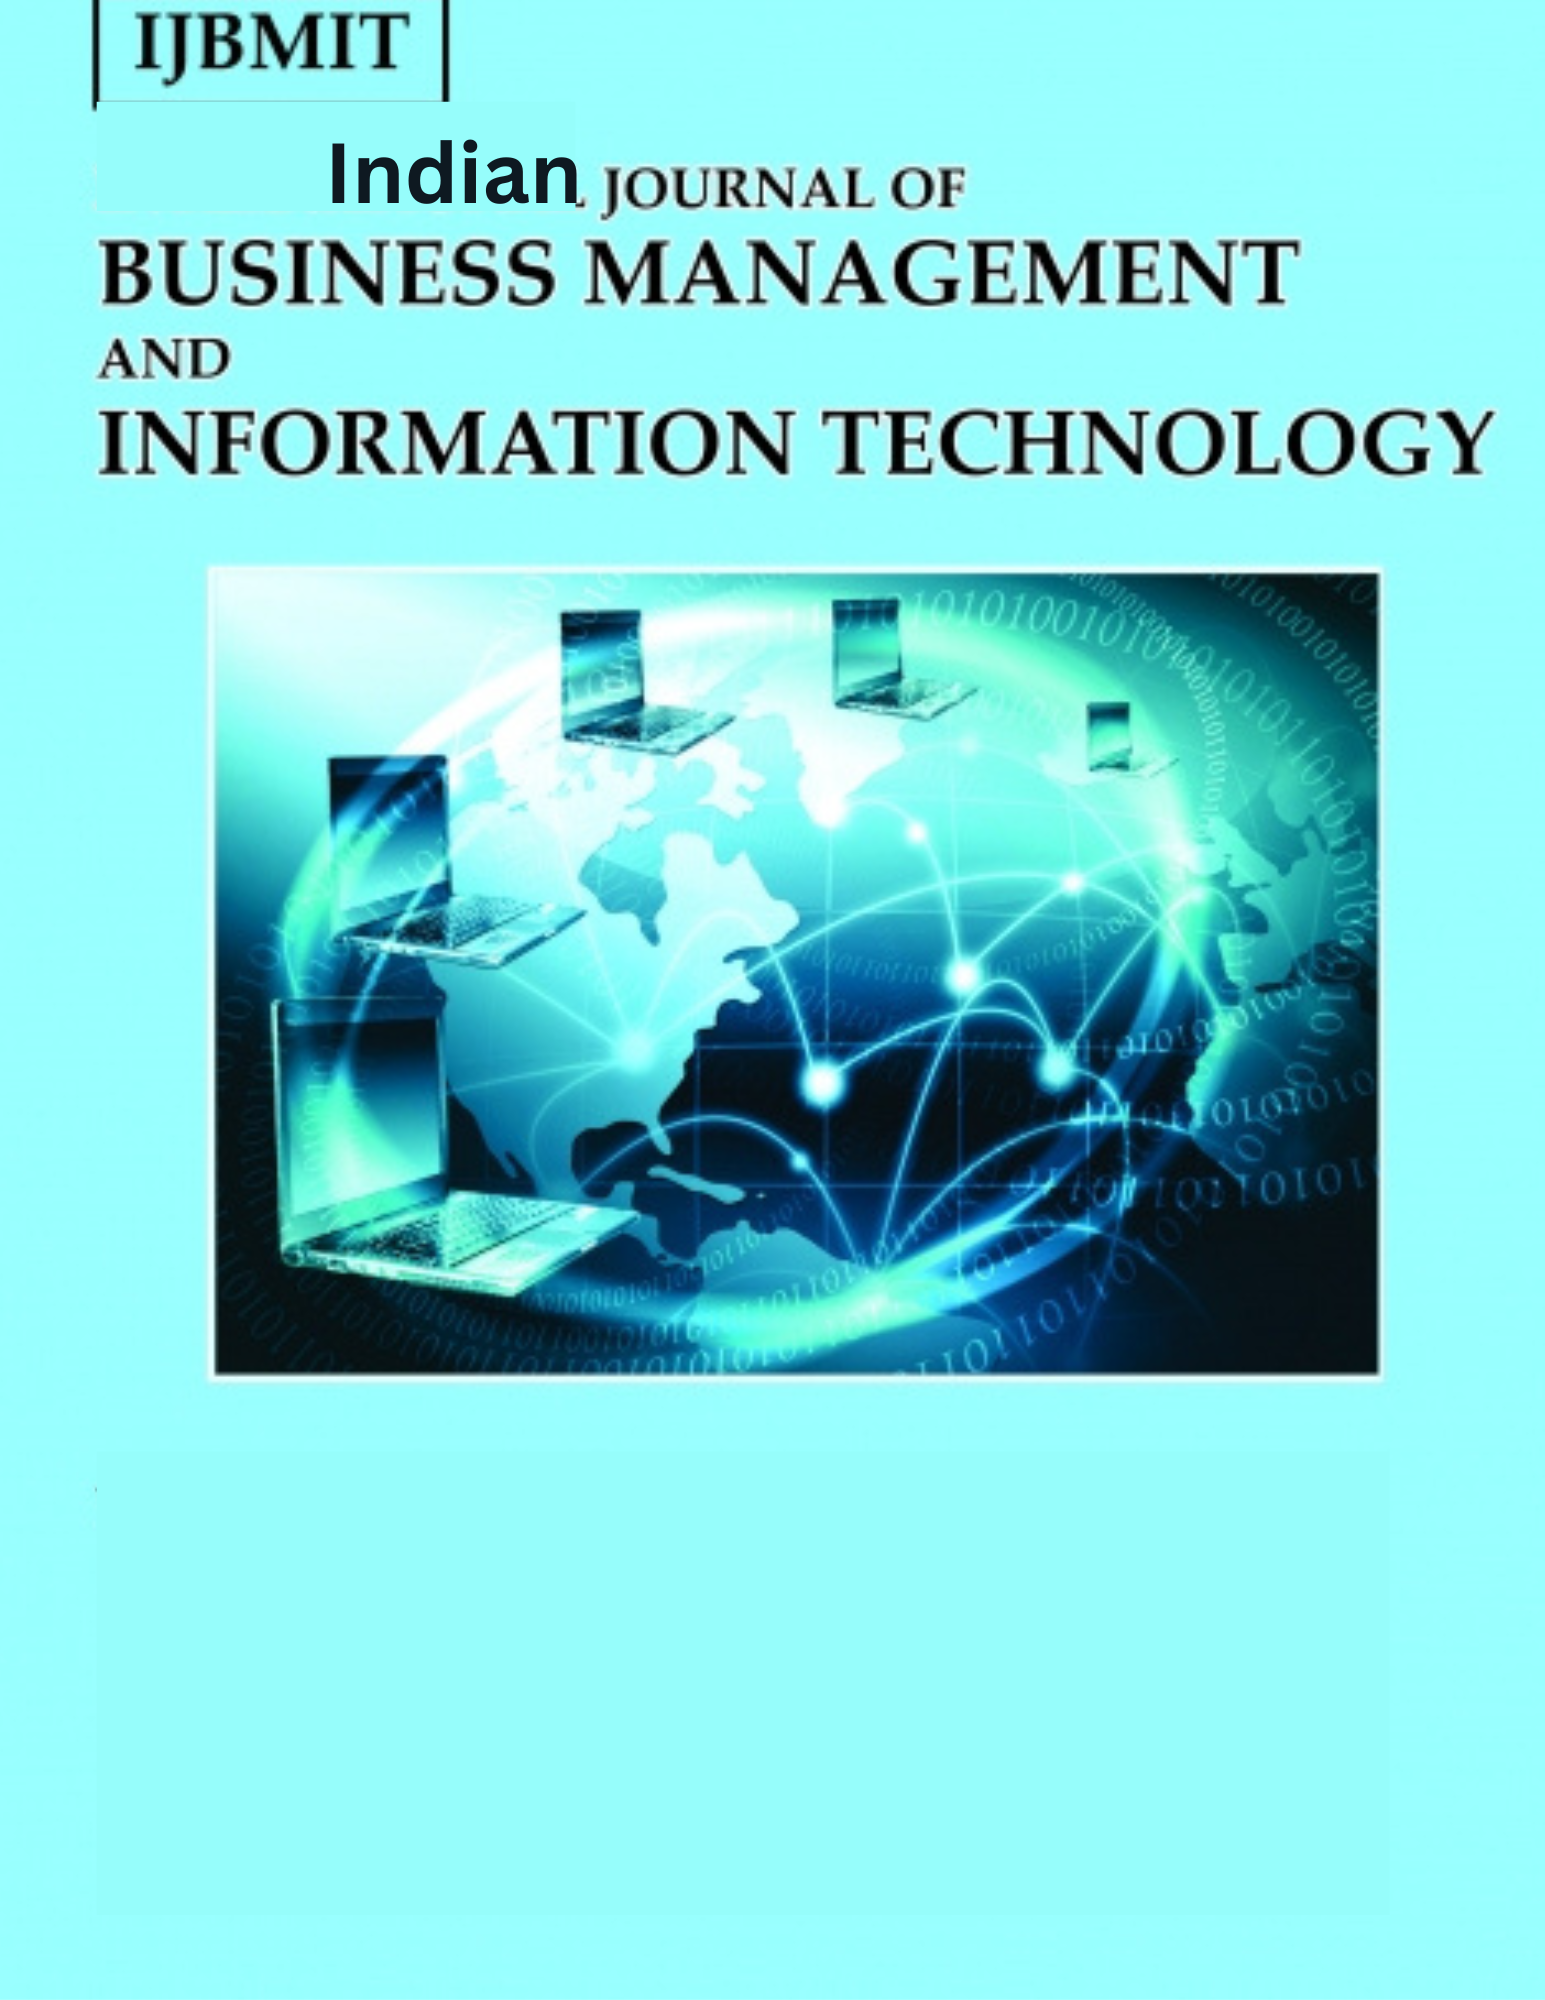 Indian Journal of Business Management and Information Technology